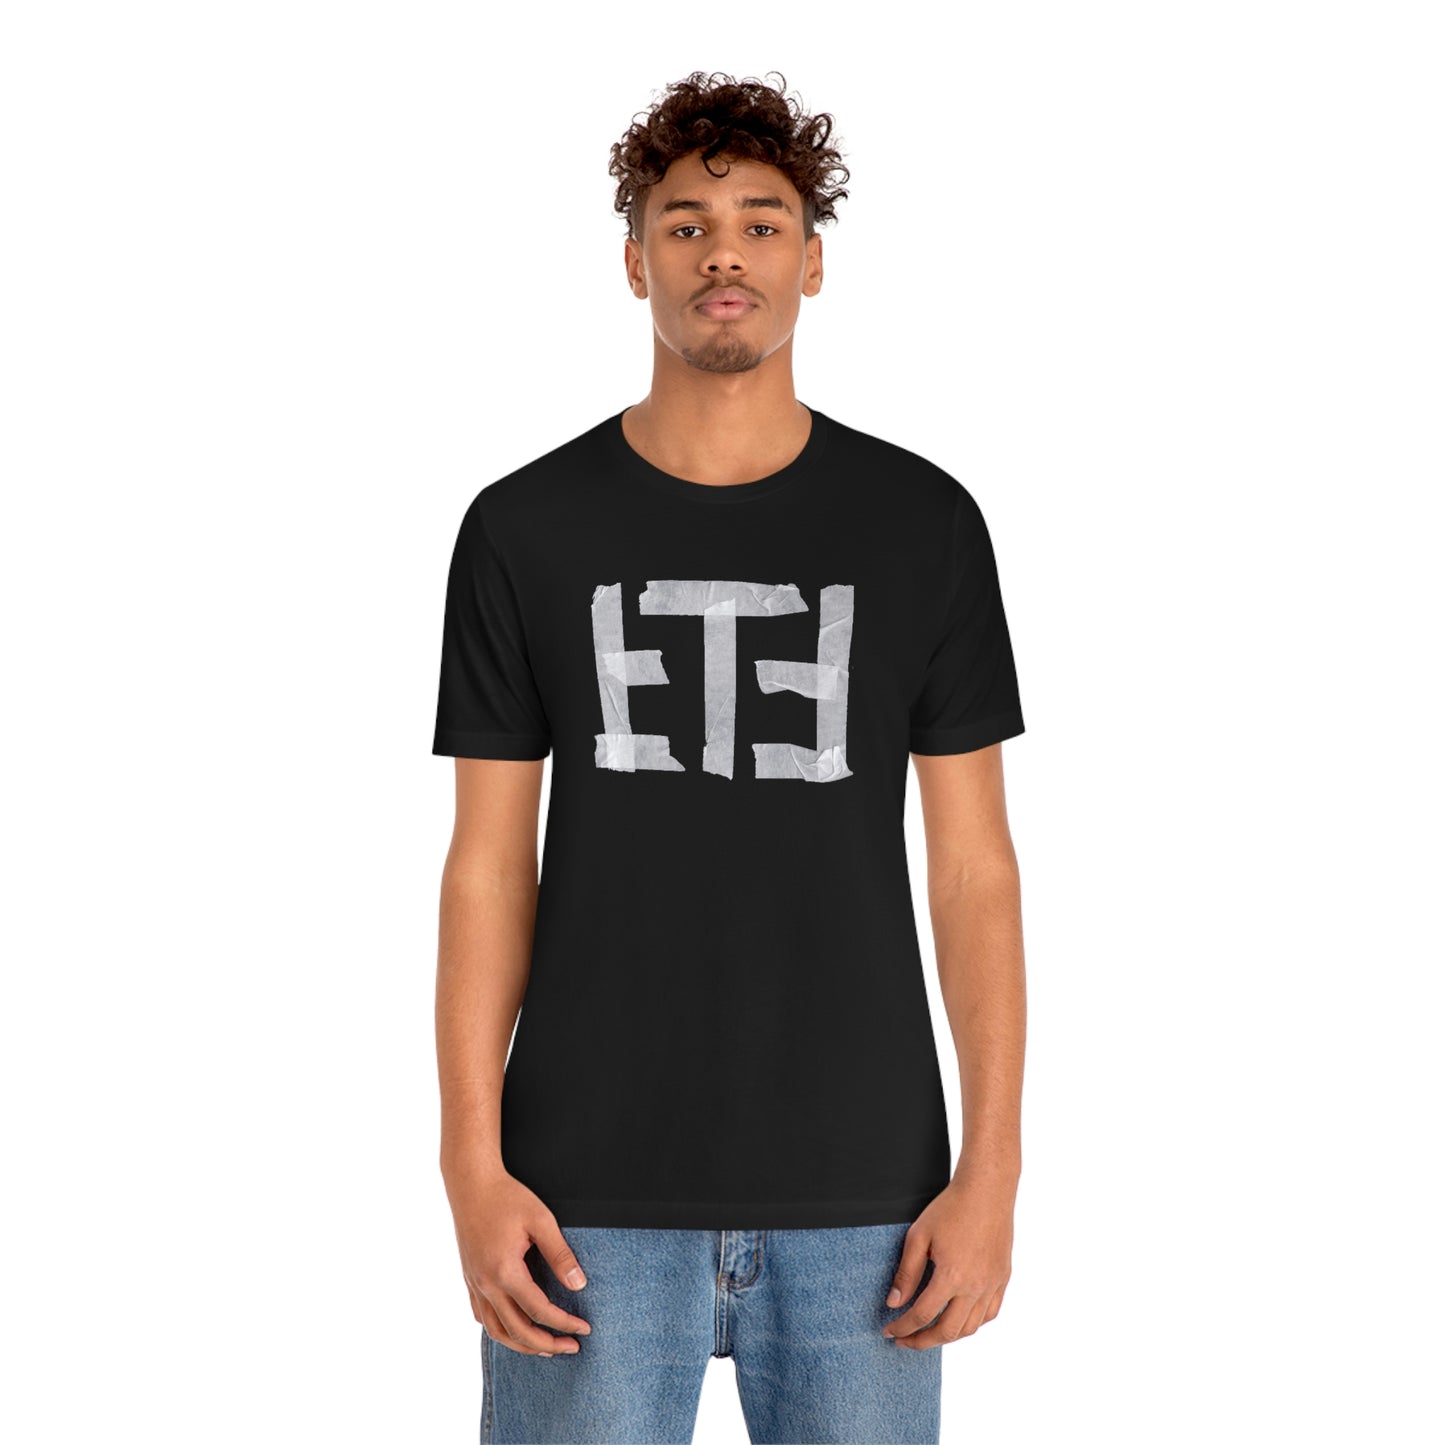 Tape Top Time Short Sleeve Tee